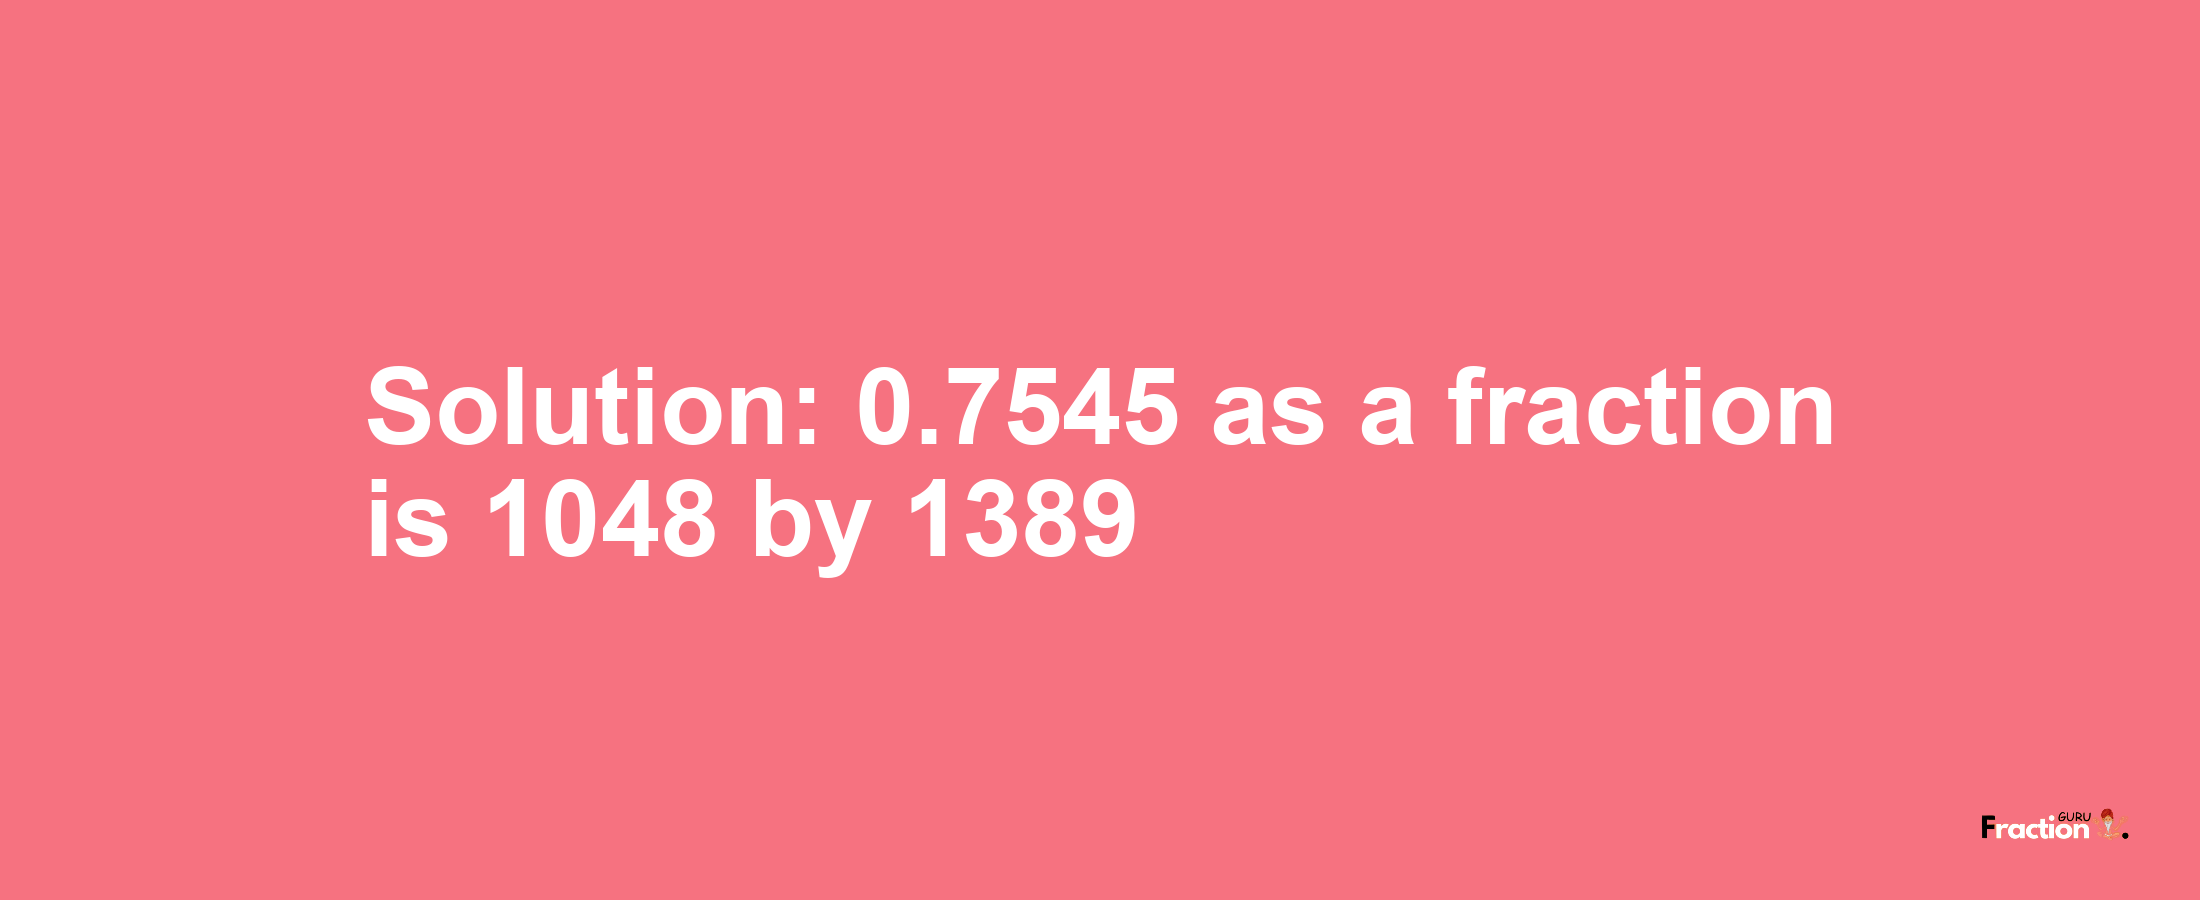 Solution:0.7545 as a fraction is 1048/1389